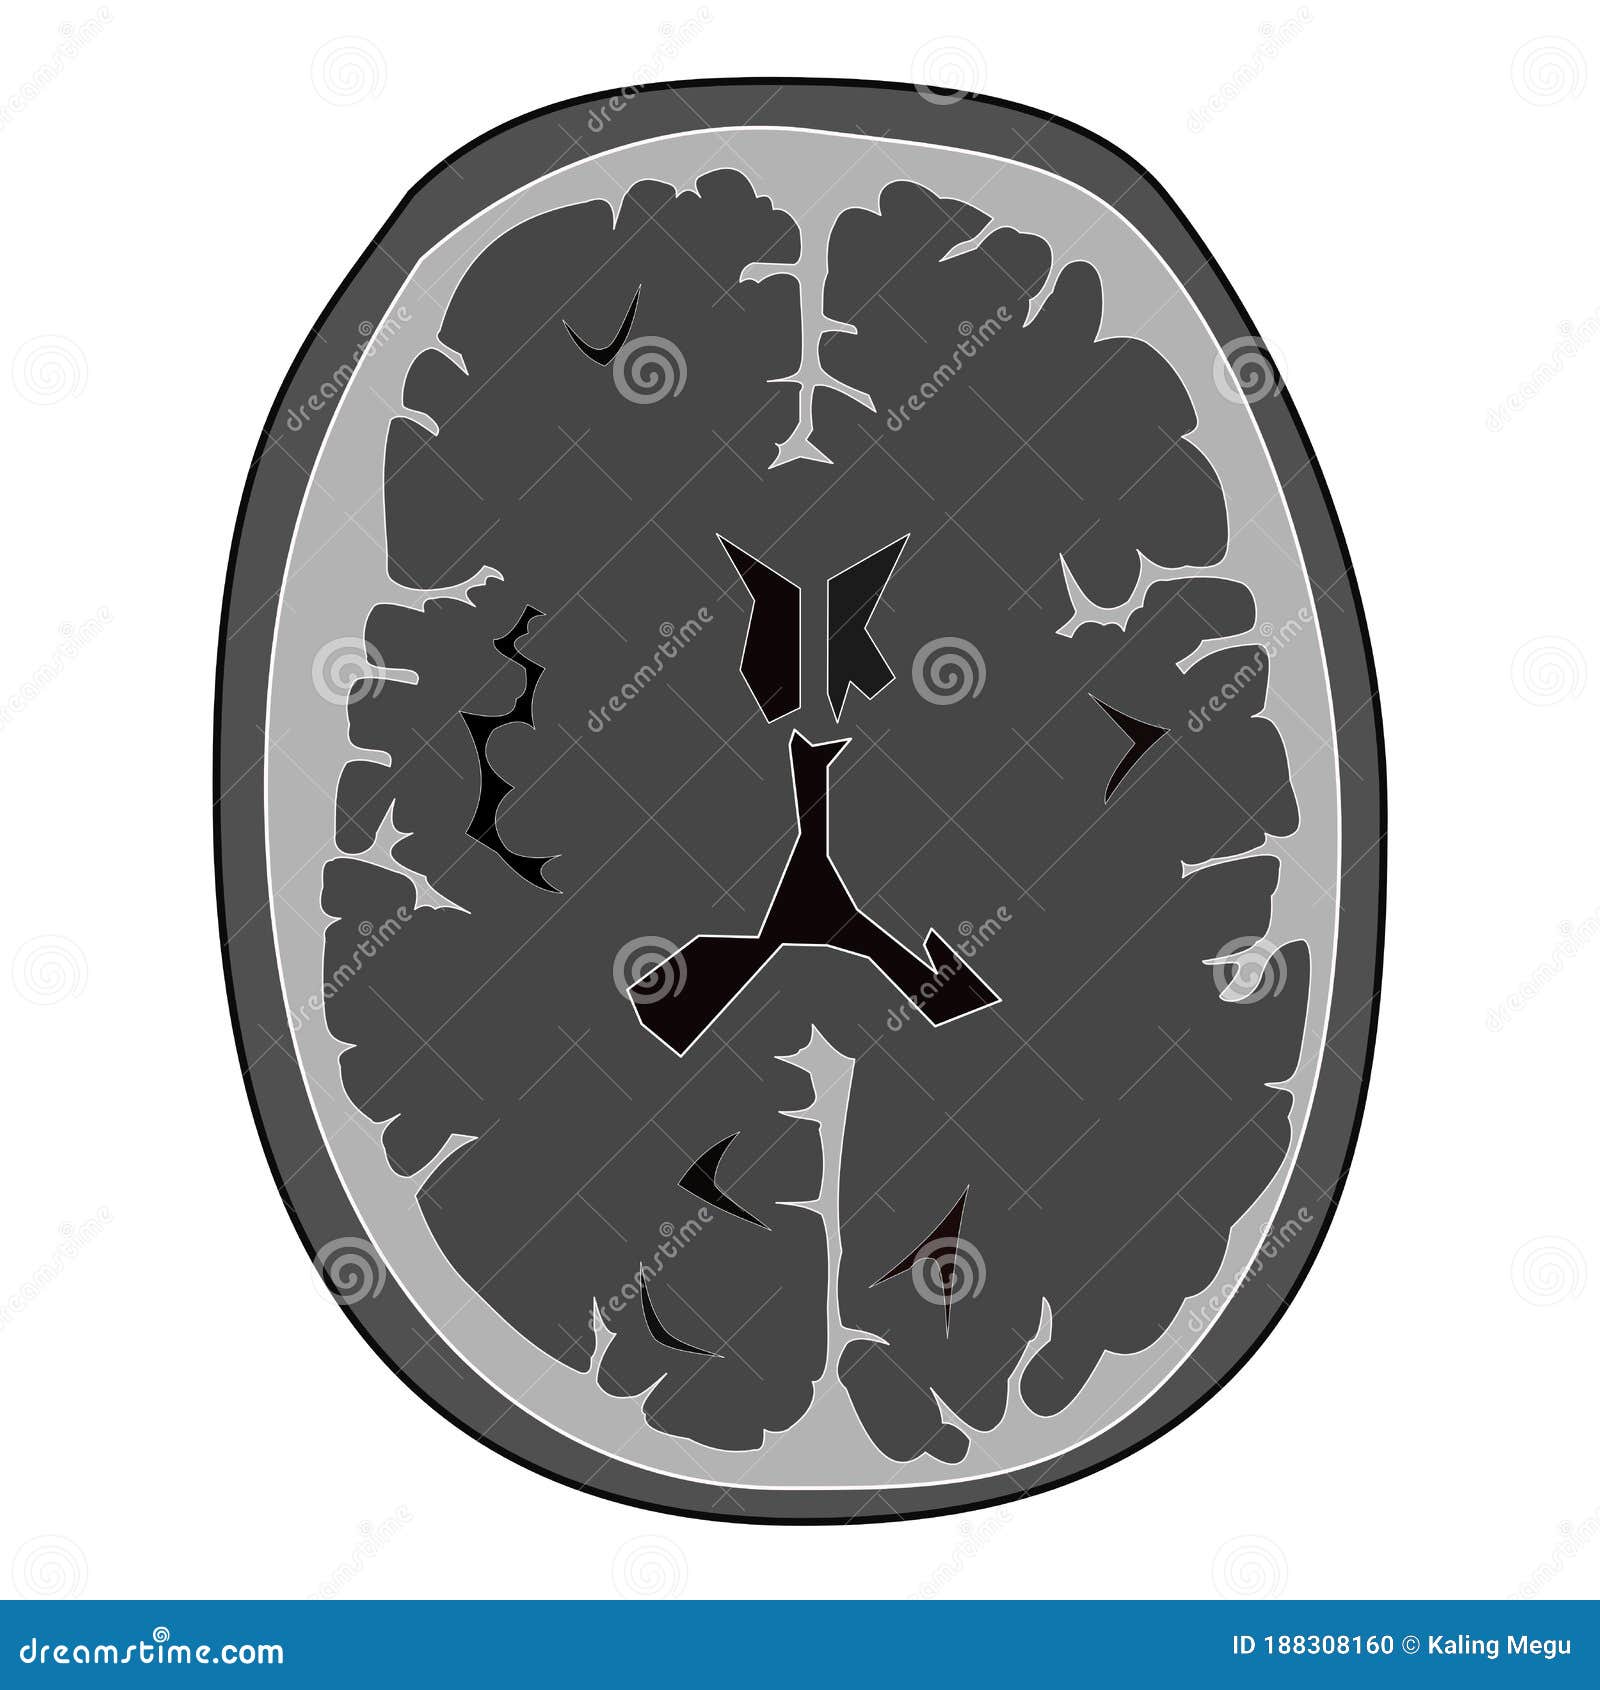 Illustrative Picture Of Normal Ct Scan Of Head Of Human Brain Stock